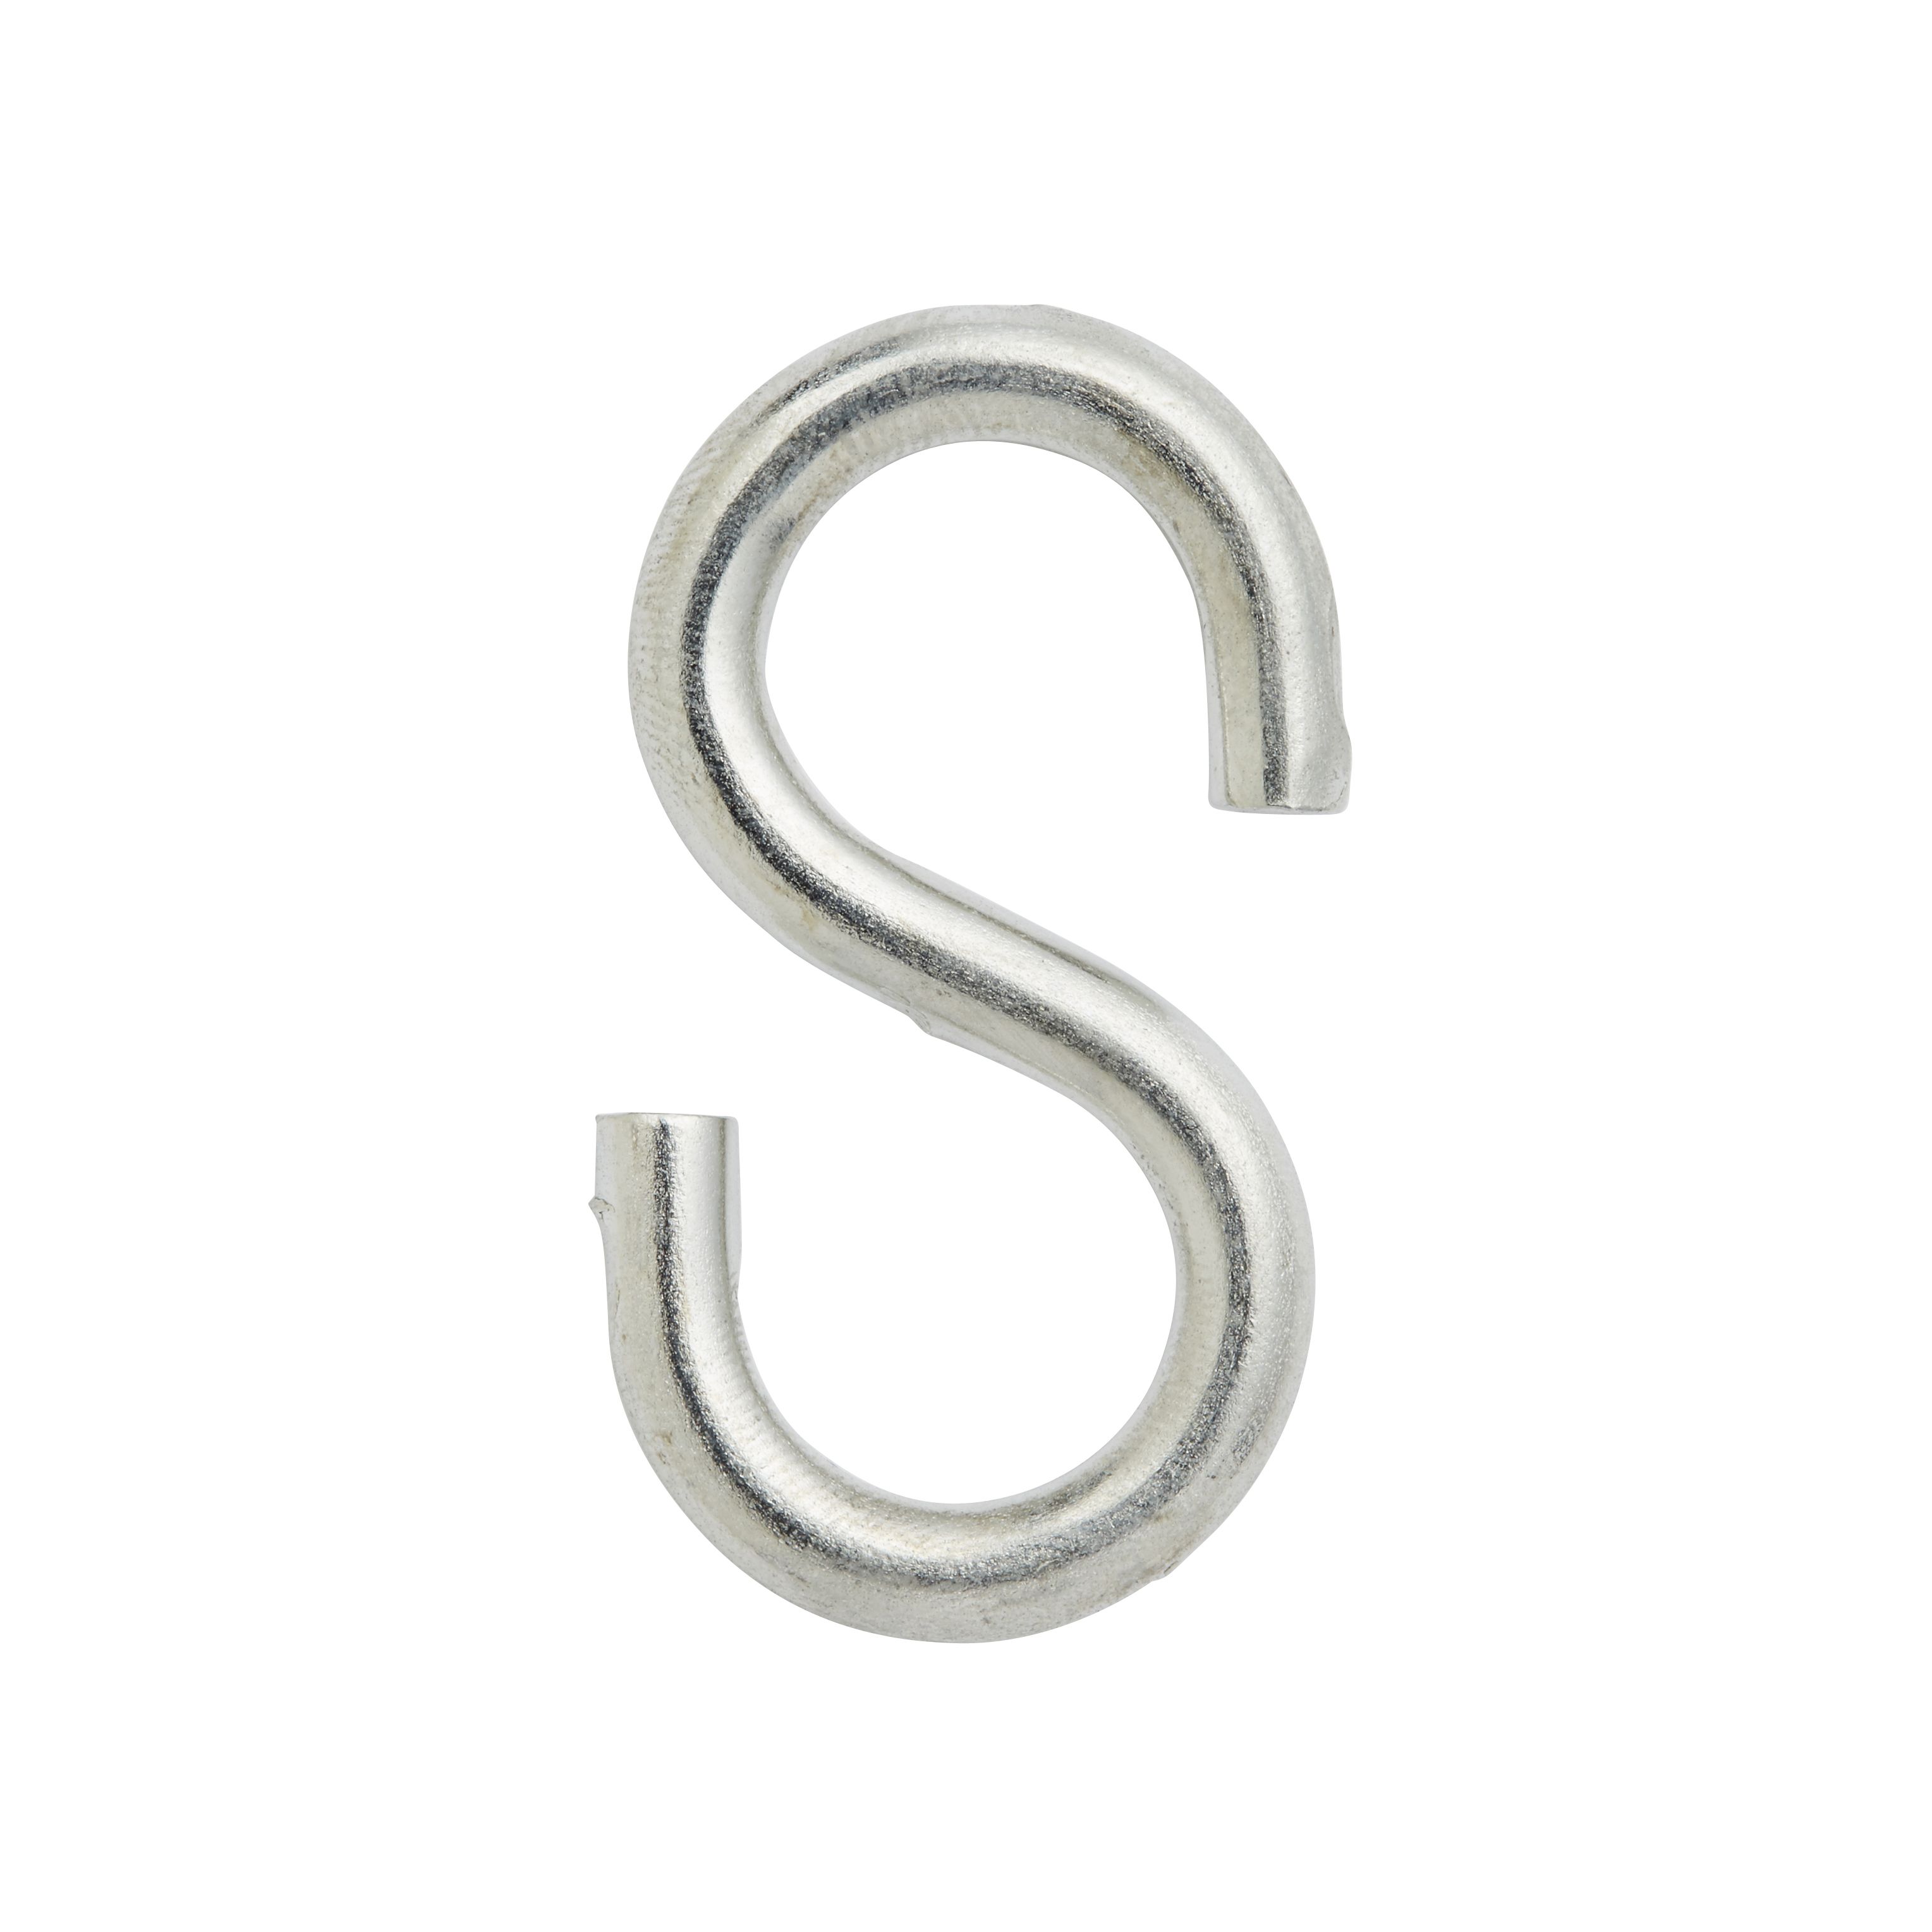 Diall Zinc-plated Steel S-hook (L)35mm, Pack of 4